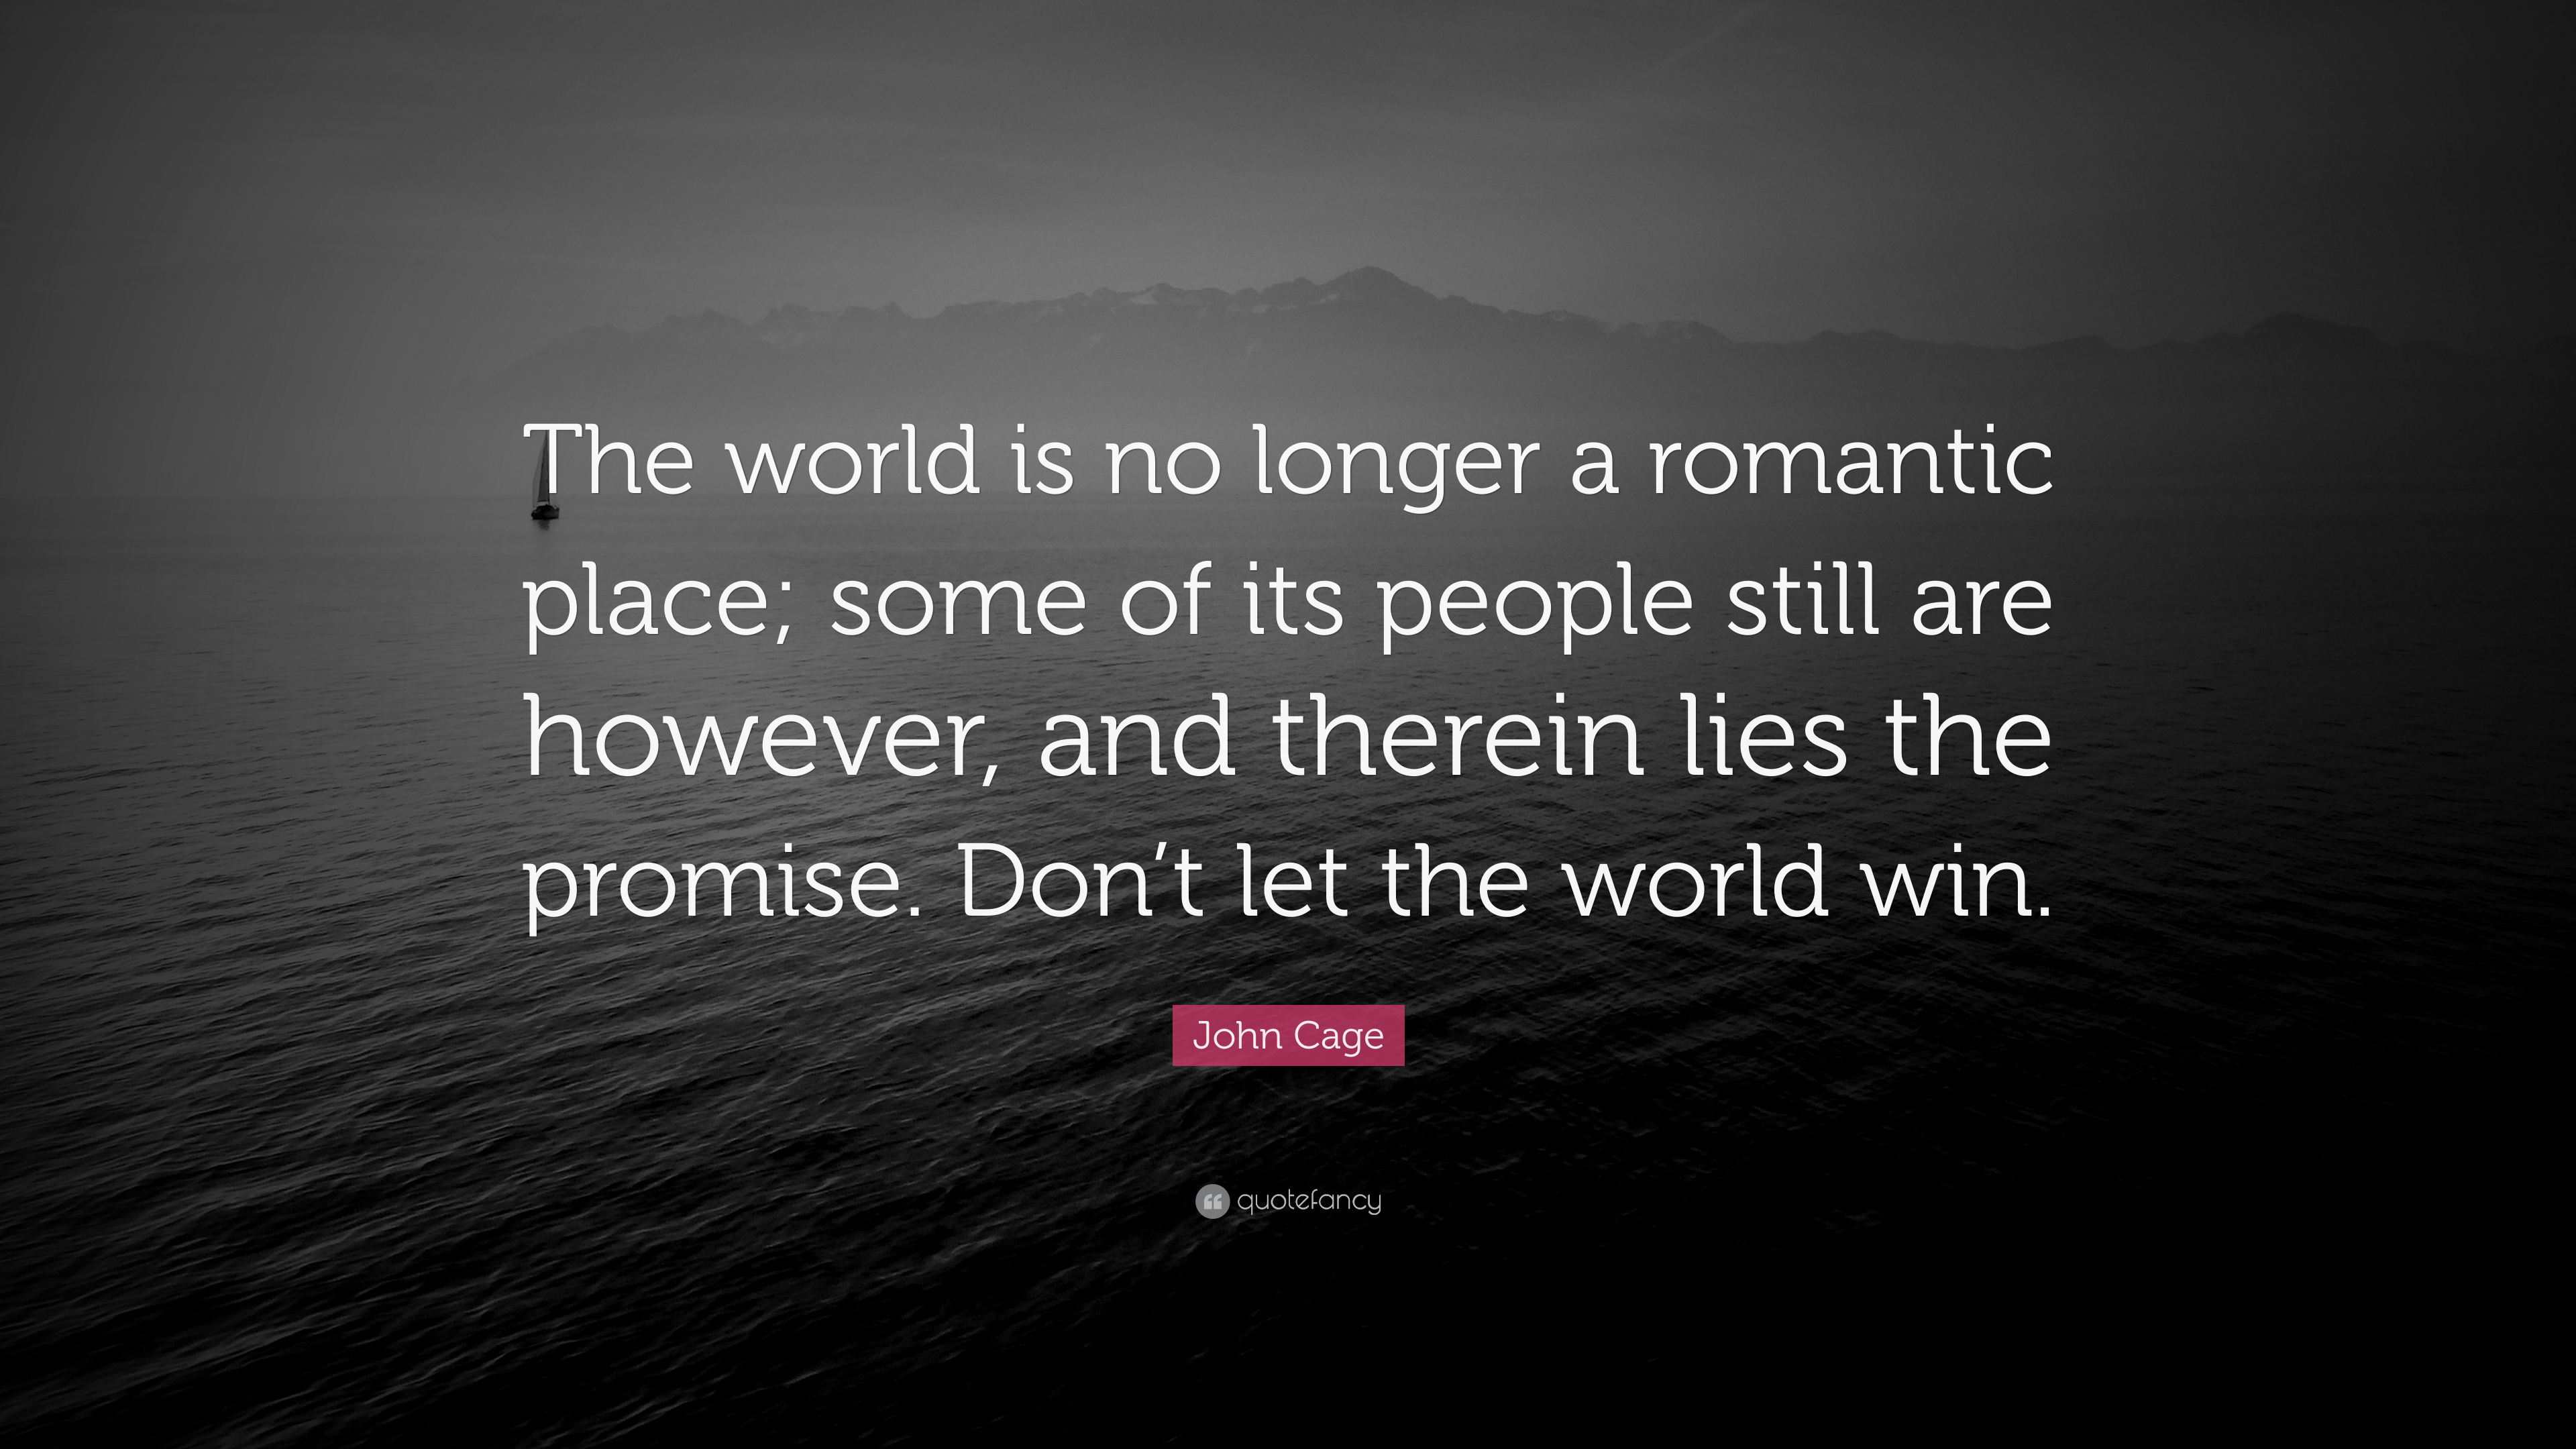 John Cage Quote: "The world is no longer a romantic place.